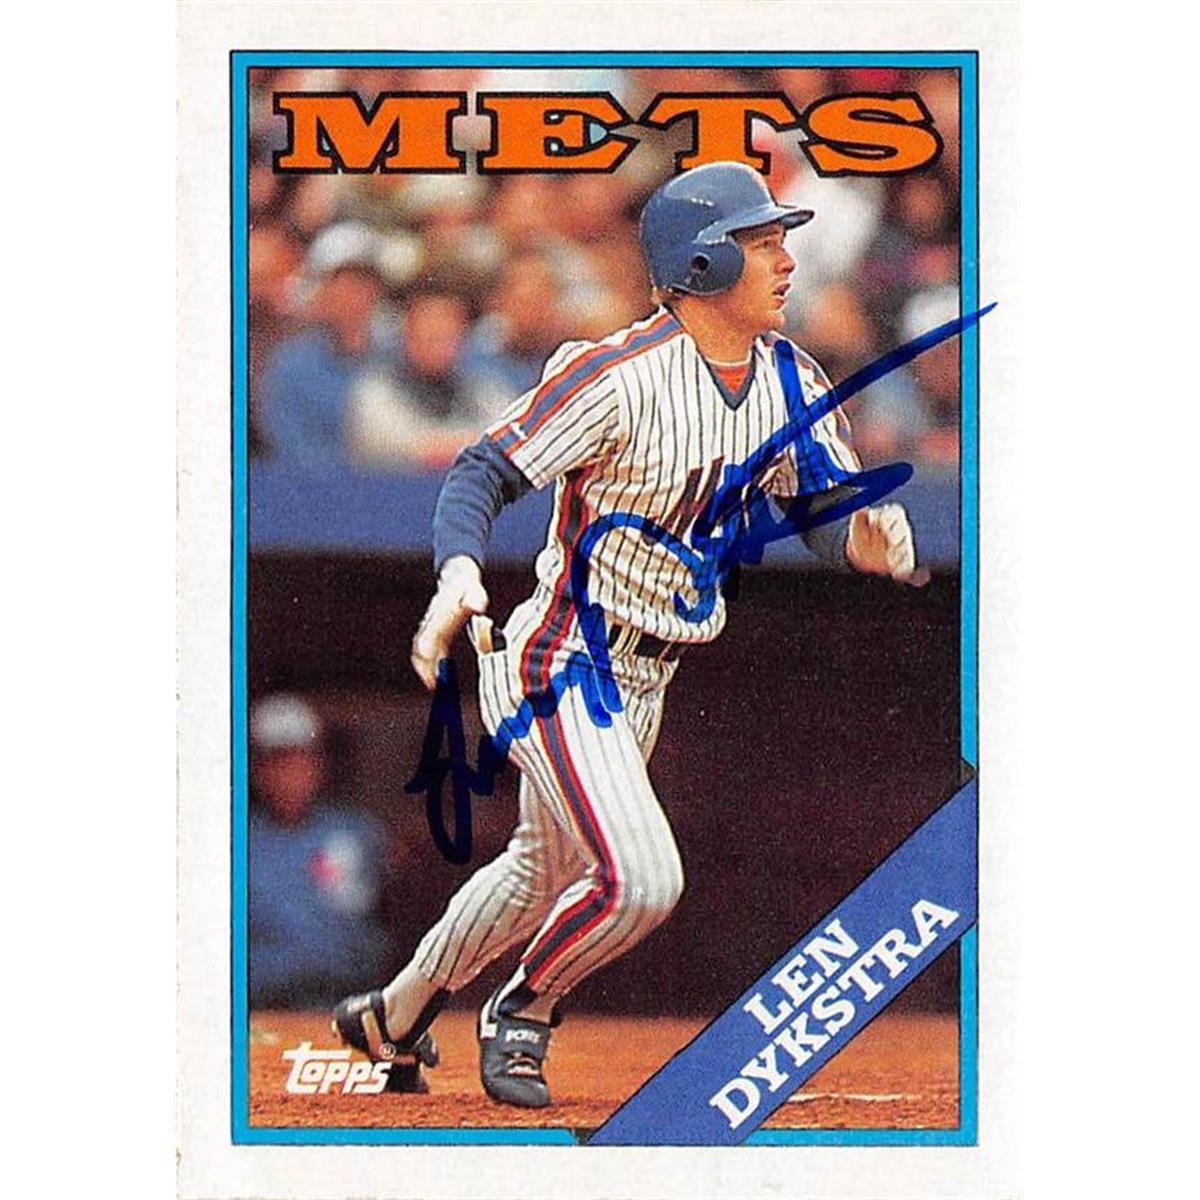 Online Shopping for Housewares, Baby Gear, Health & more. Autograph  Warehouse 688592 Lenny Dykstra Autographed New York Mets 1988 Topps No.655  Baseball Card